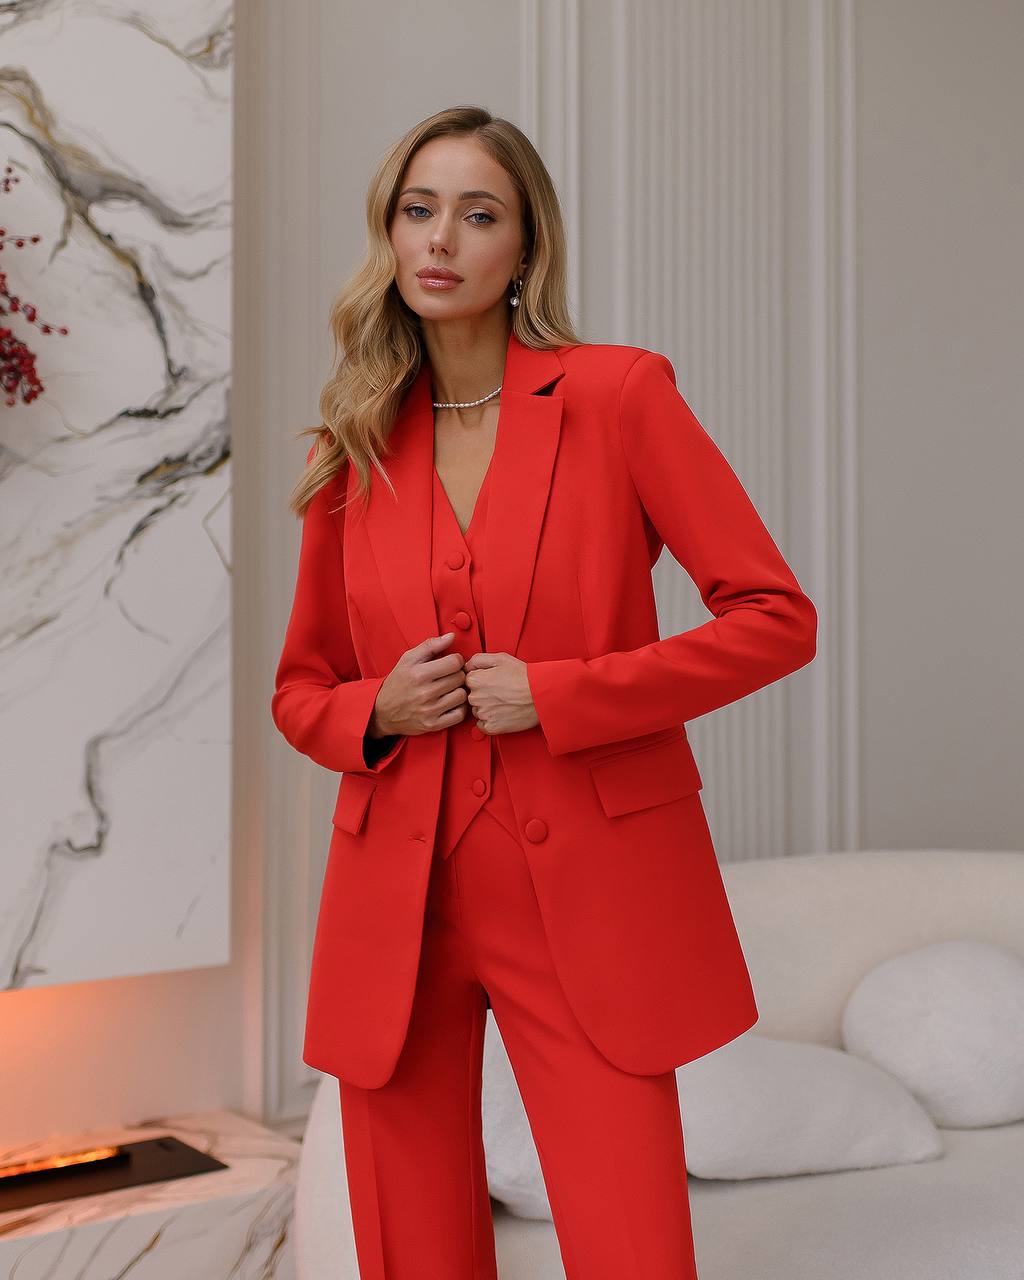 a woman in a red suit stands in front of a fireplace